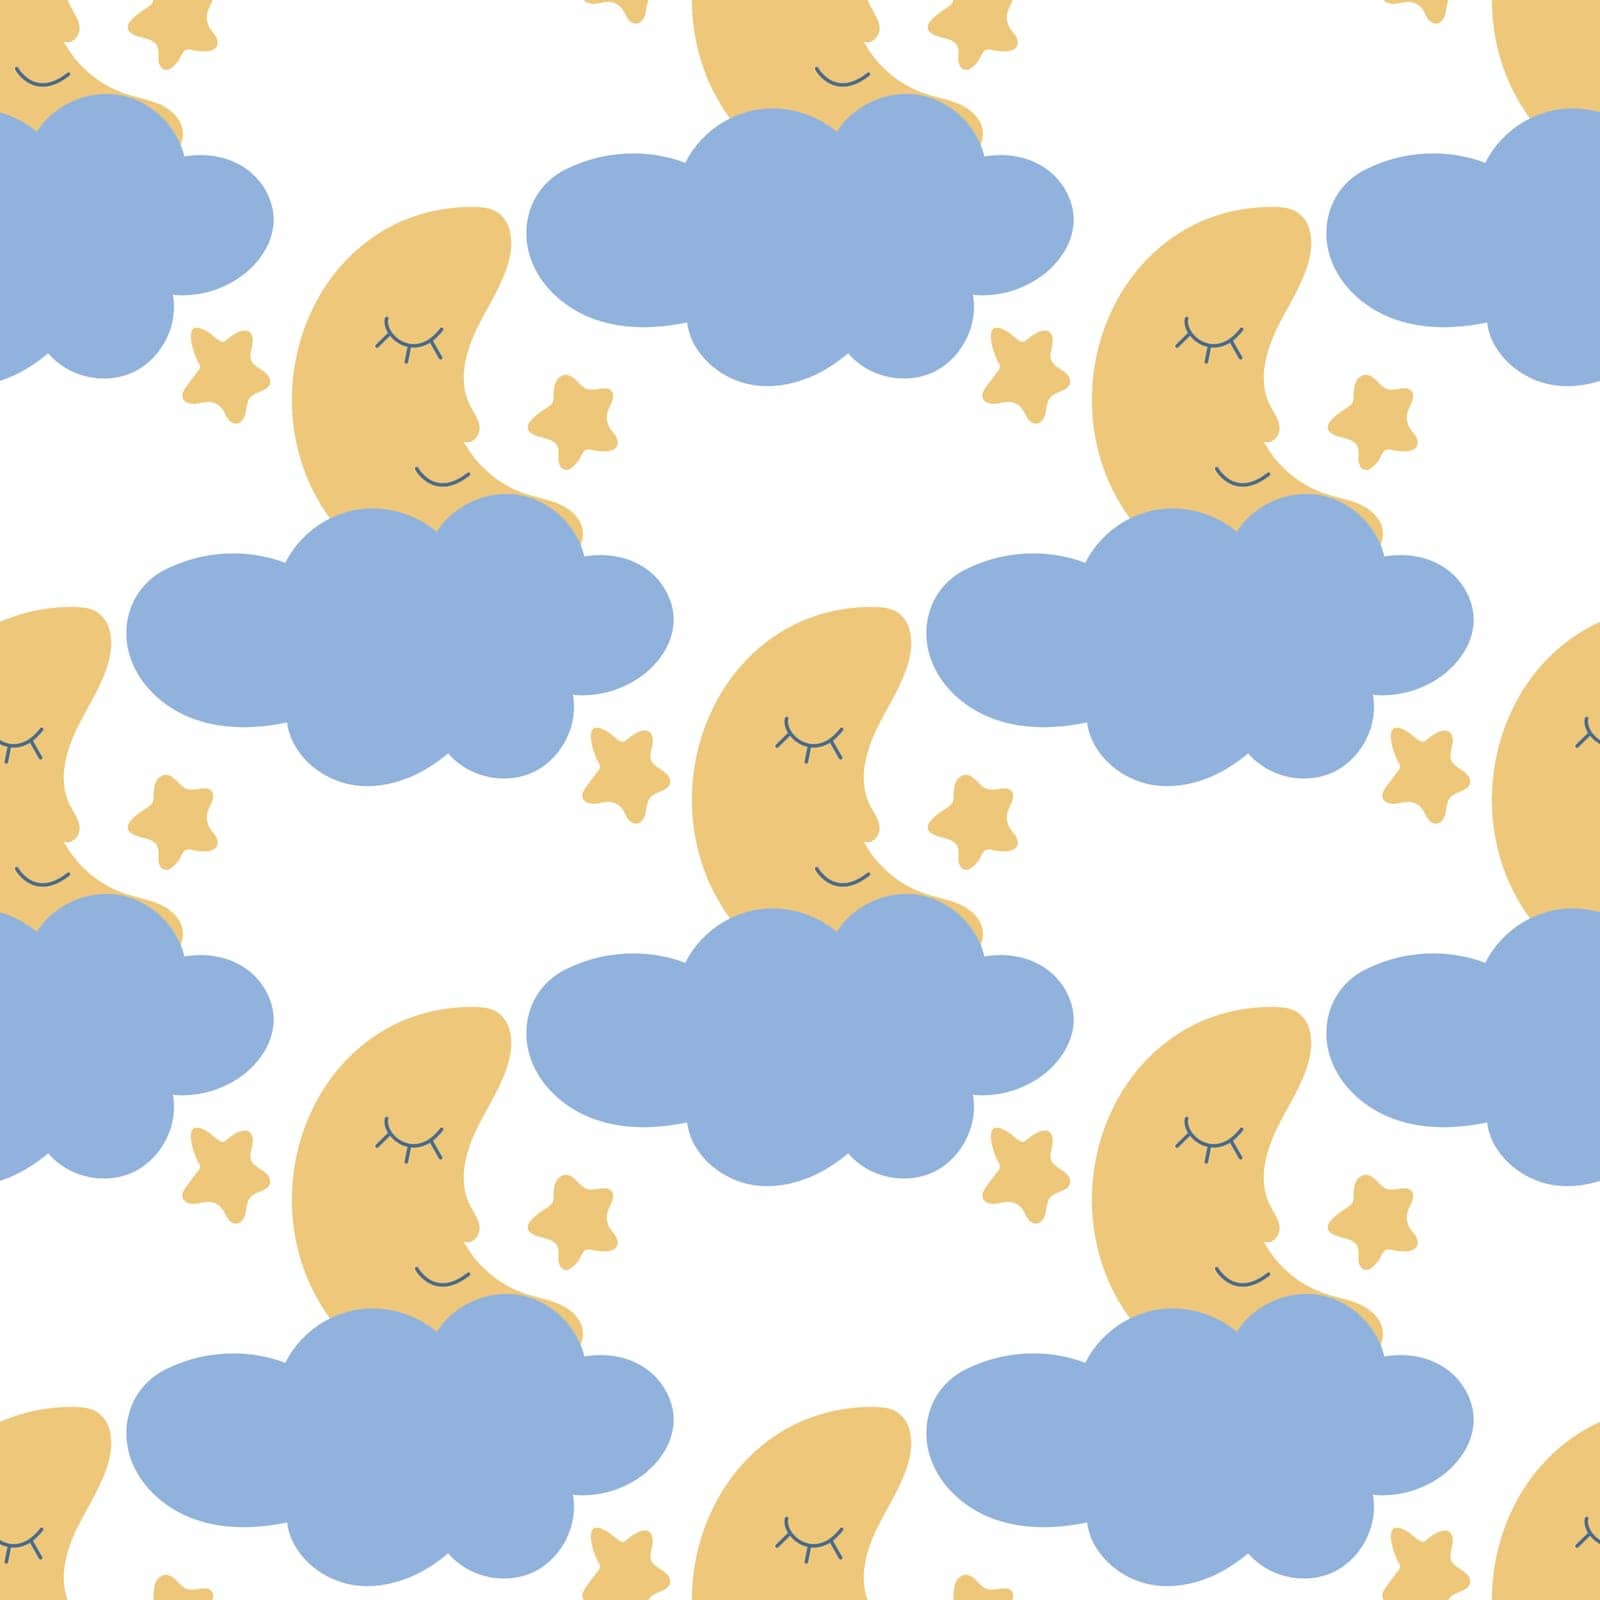 Sleeping moon in clouds with stars seamless pattern by TassiaK